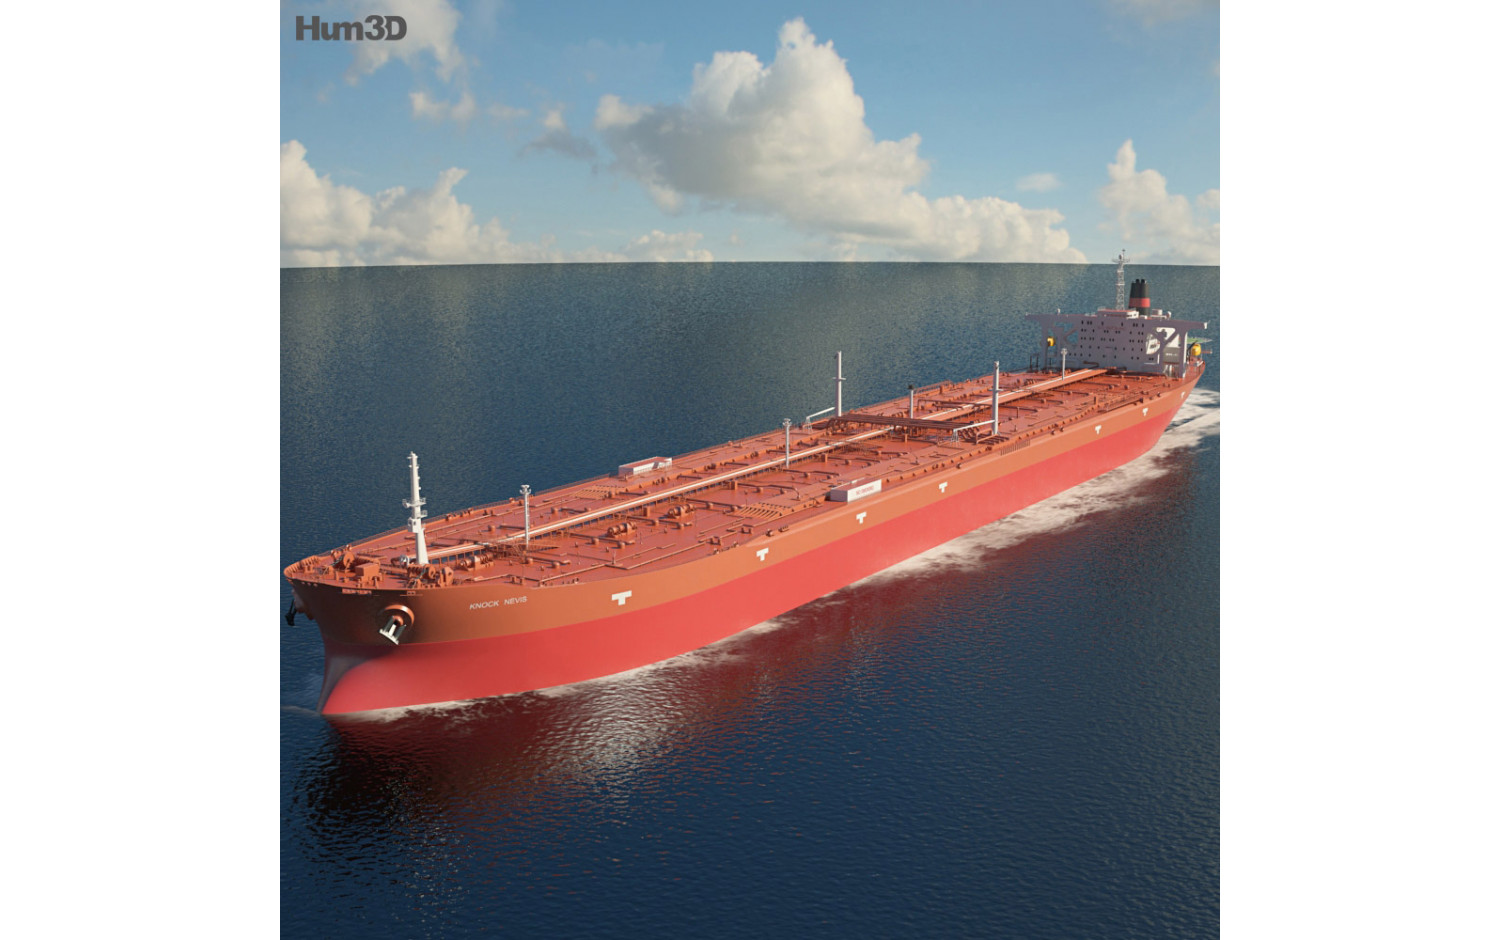 Manteniship :: So was the Knock the largest oil tanker in history.